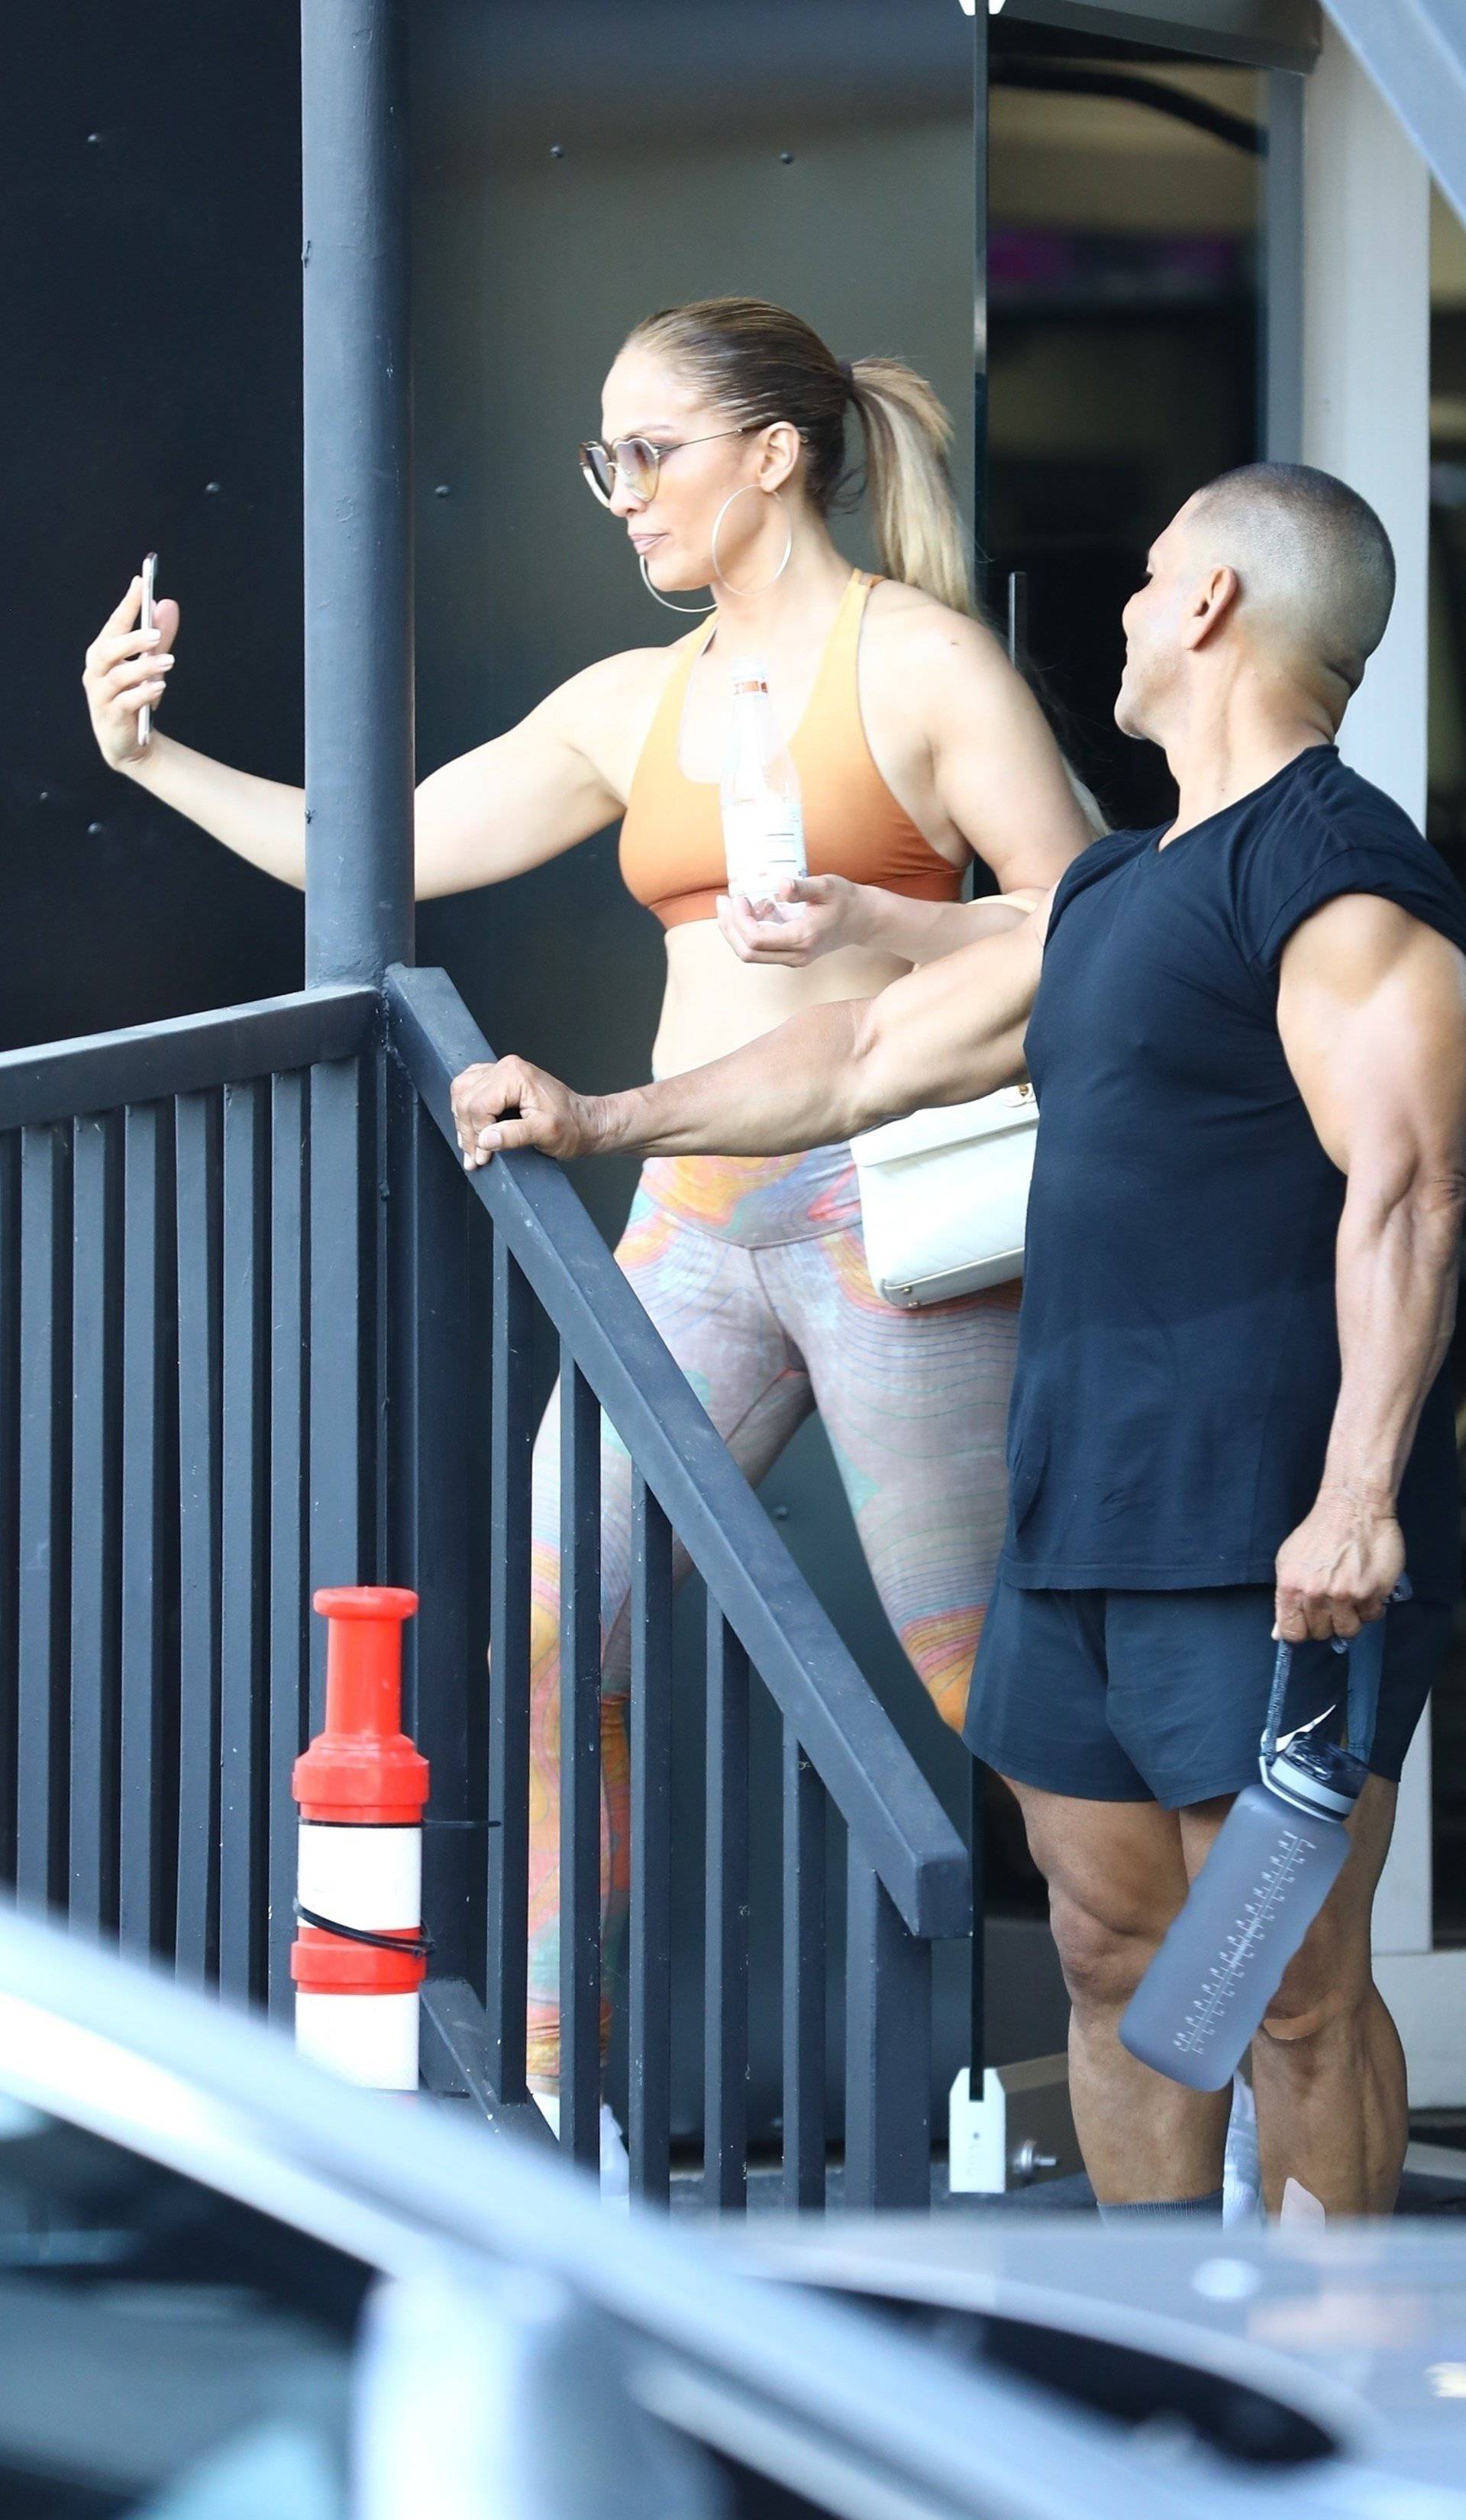 *EXCLUSIVE* Looking good, girl! Jennifer Lopez facetimes Alex as she leaves a gym session in Brentwood